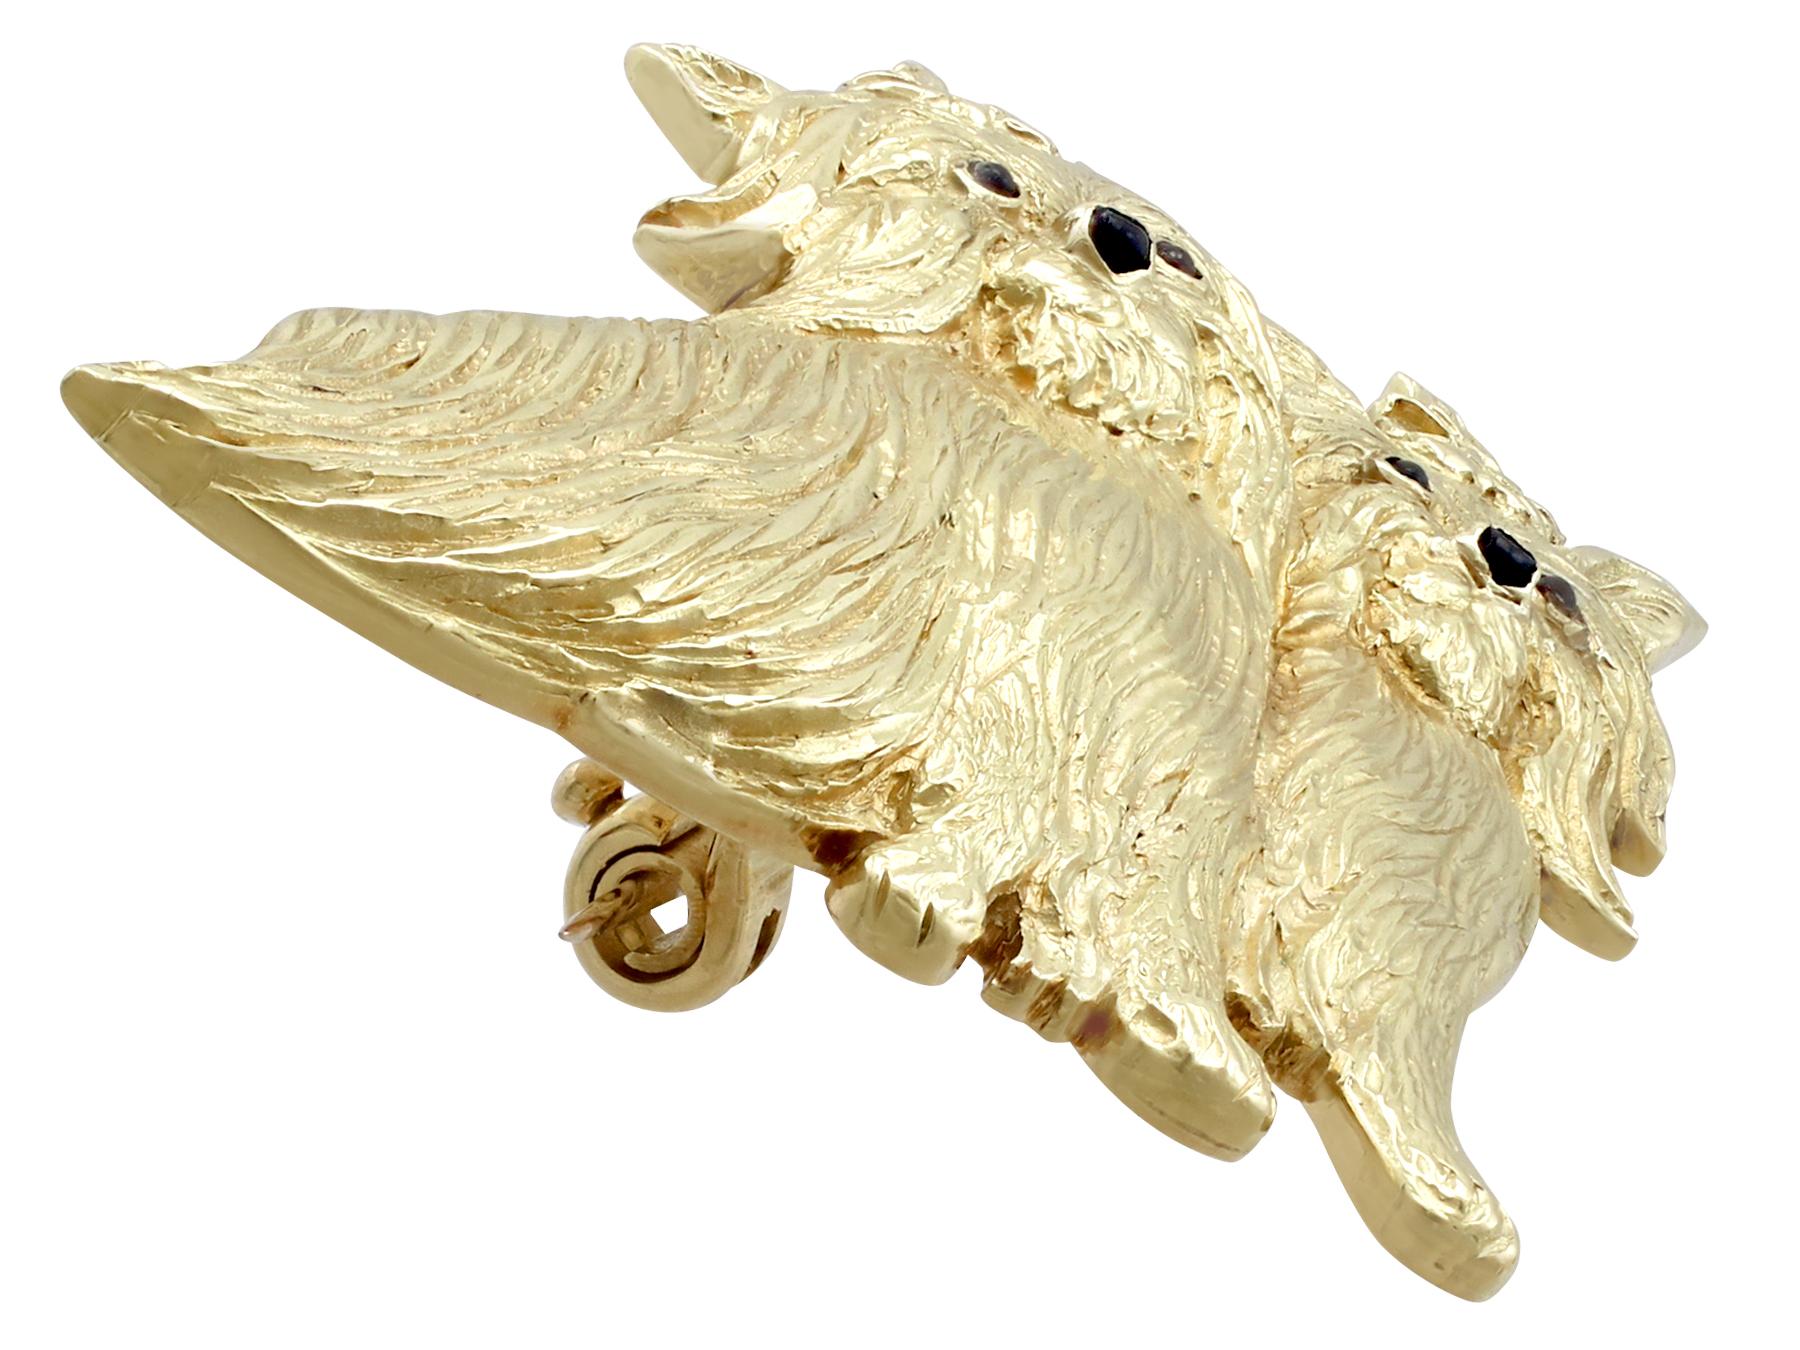 An impressive vintage 0.10 carat smoky quartz and 18 karat yellow gold 'Yorkshire Terrier' dog brooch; part of our diverse antique jewellery and estate jewelry collections.

This fine and impressive 18k yellow gold brooch has been modelled in the